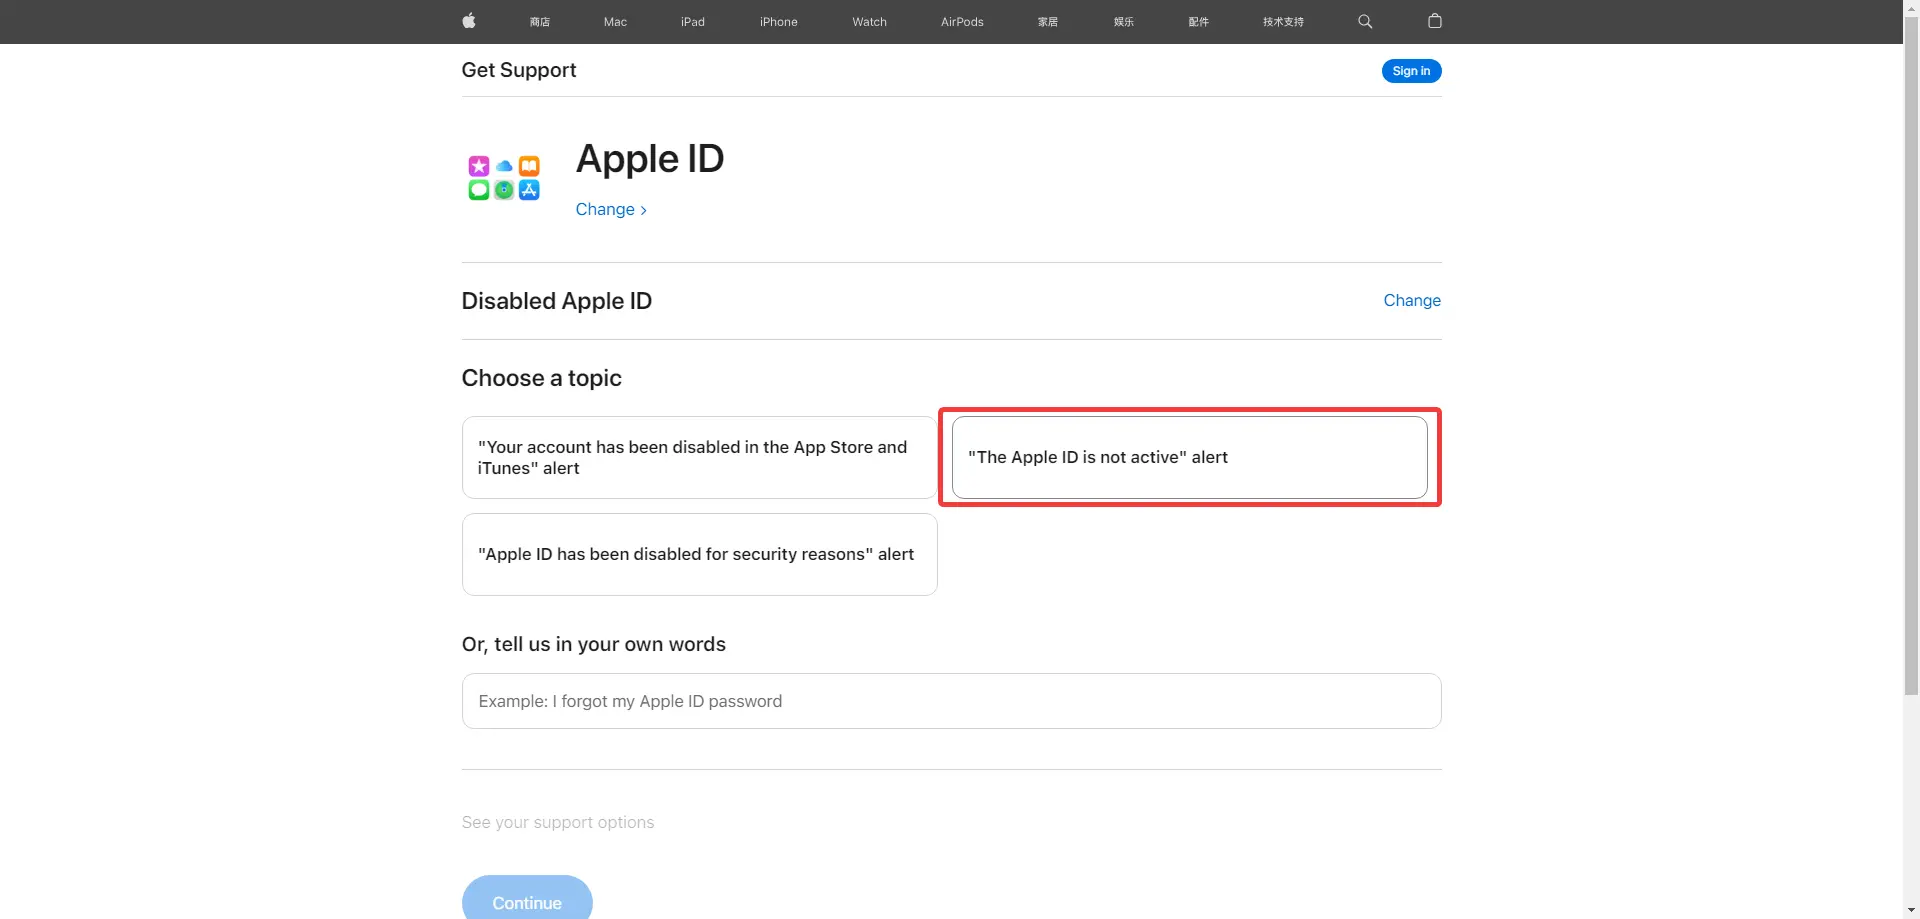 The Apple ID is not active